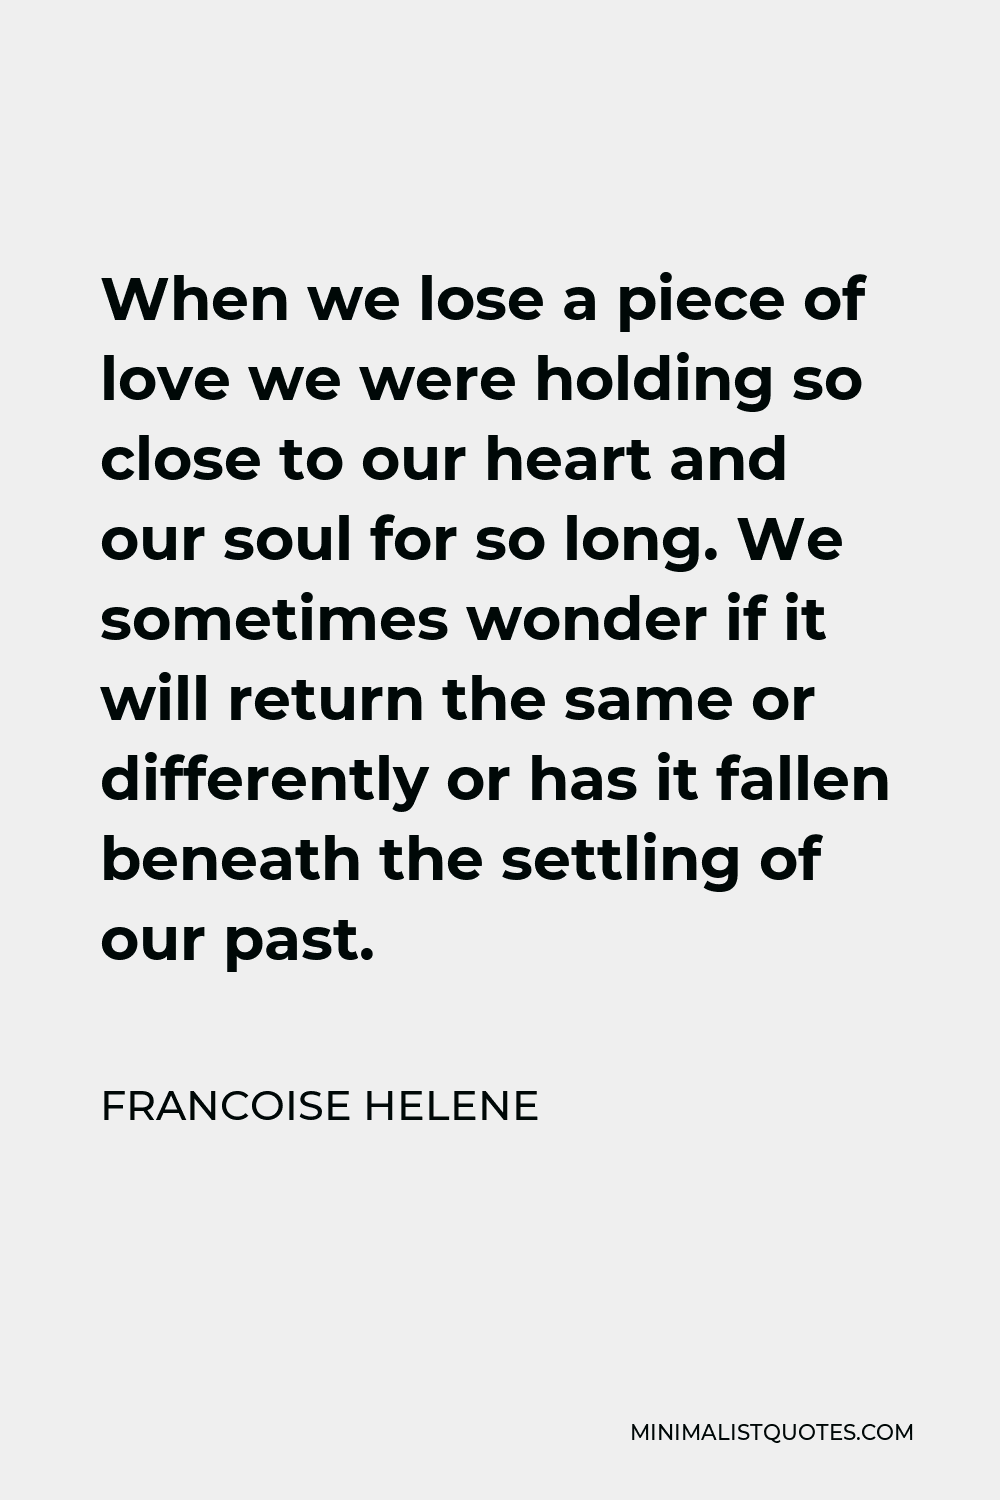 Francoise Helene Quote - When we lose a piece of love we were holding so close to our heart and our soul for so long. We sometimes wonder if it will return the same or differently or has it fallen beneath the settling of our past.